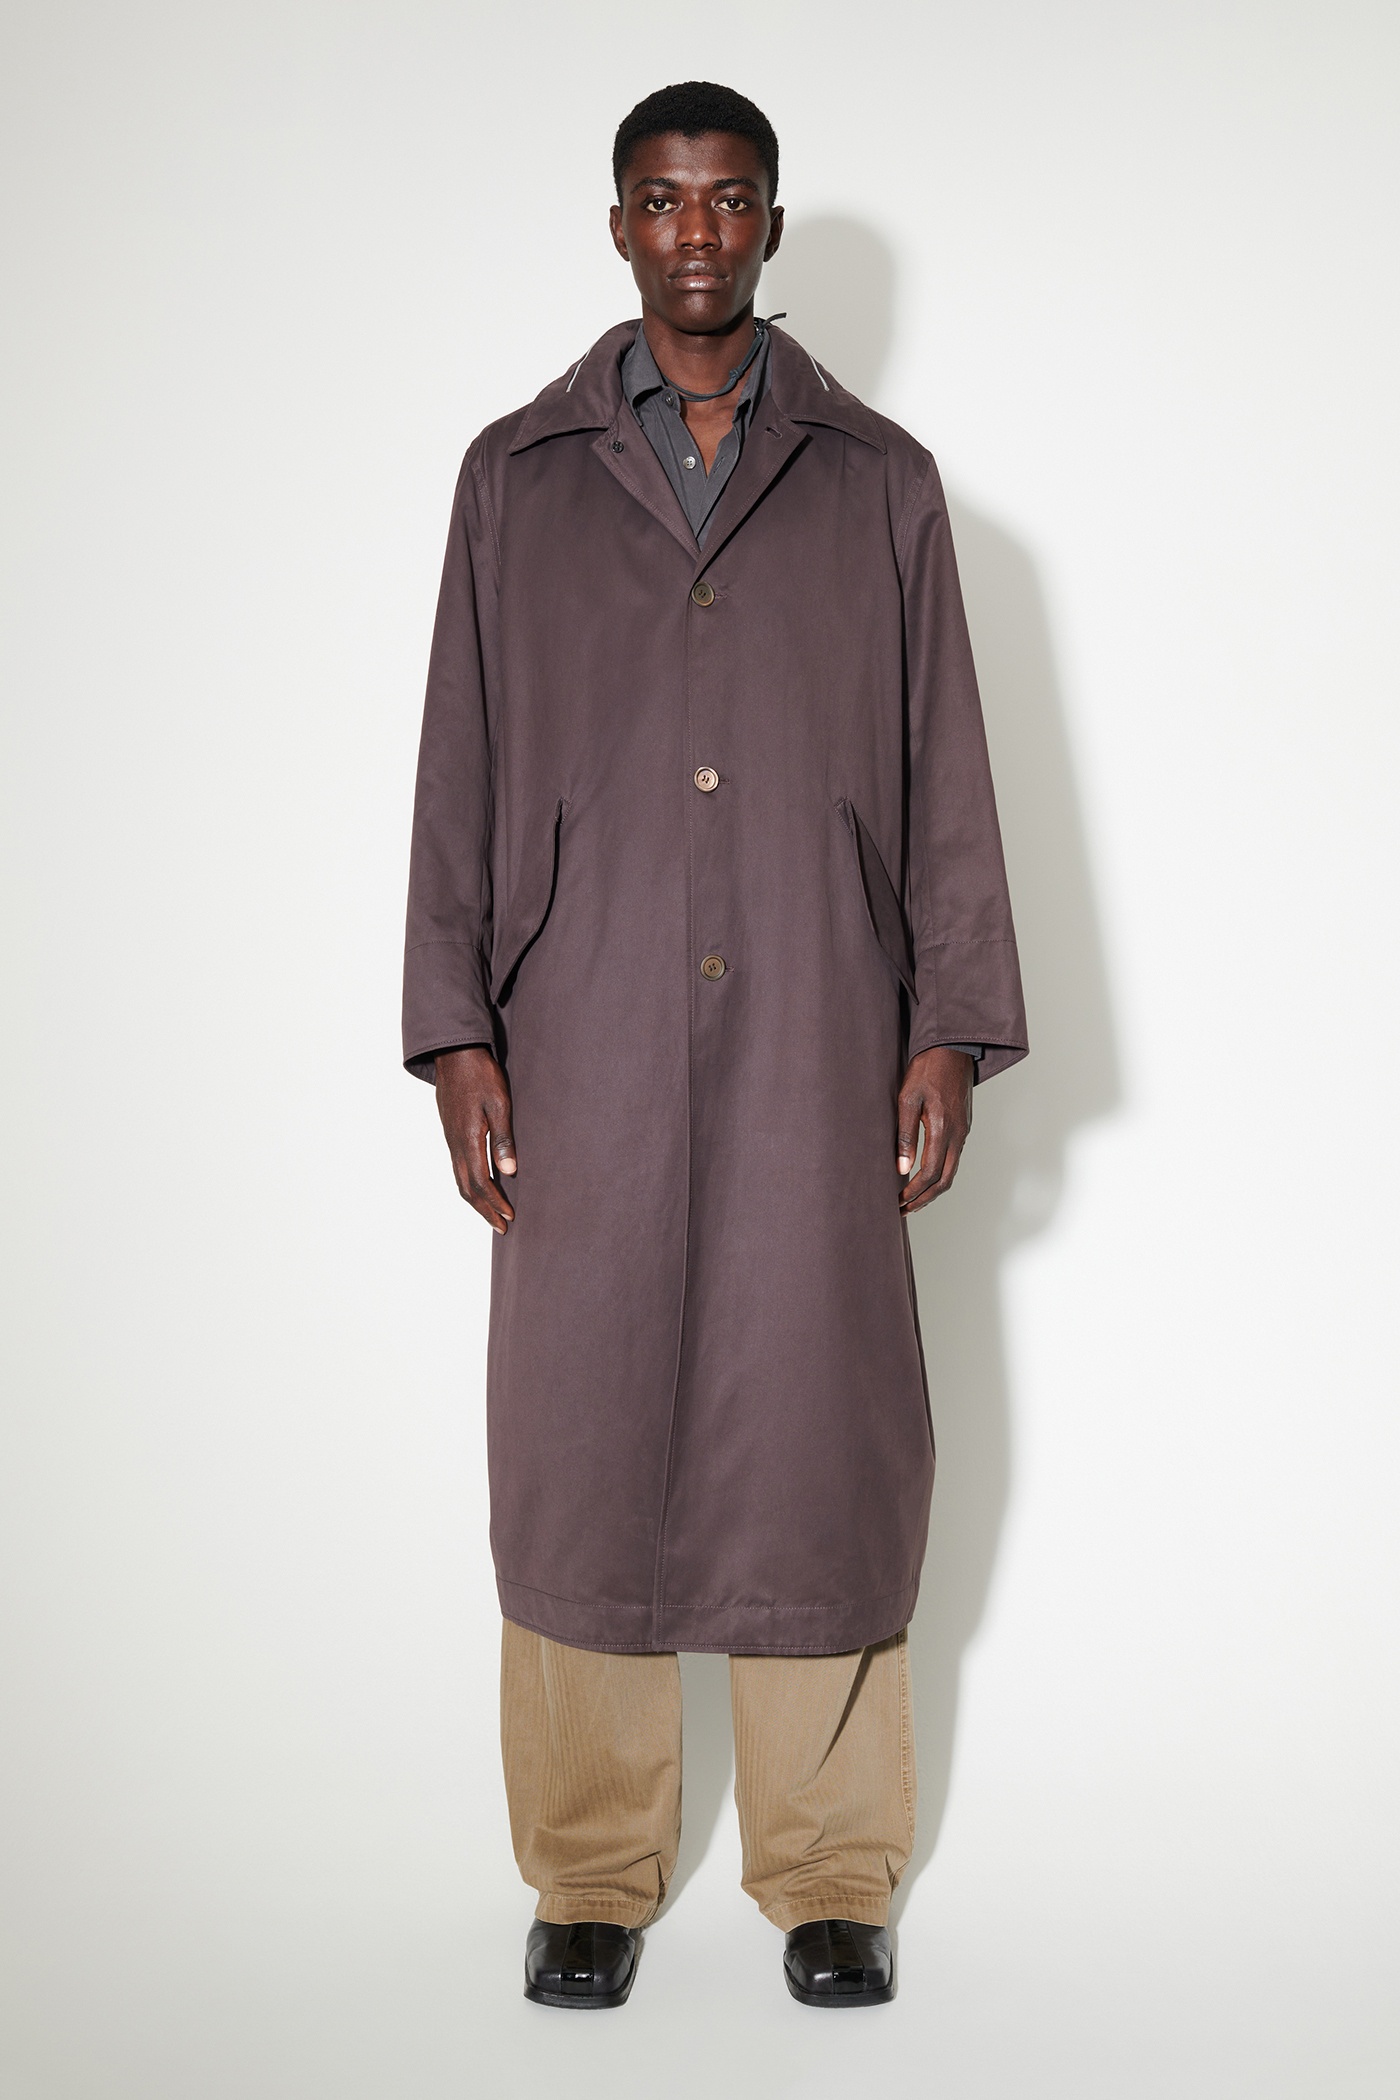 Emerge Coat Profound Brown Peached Tech - 7